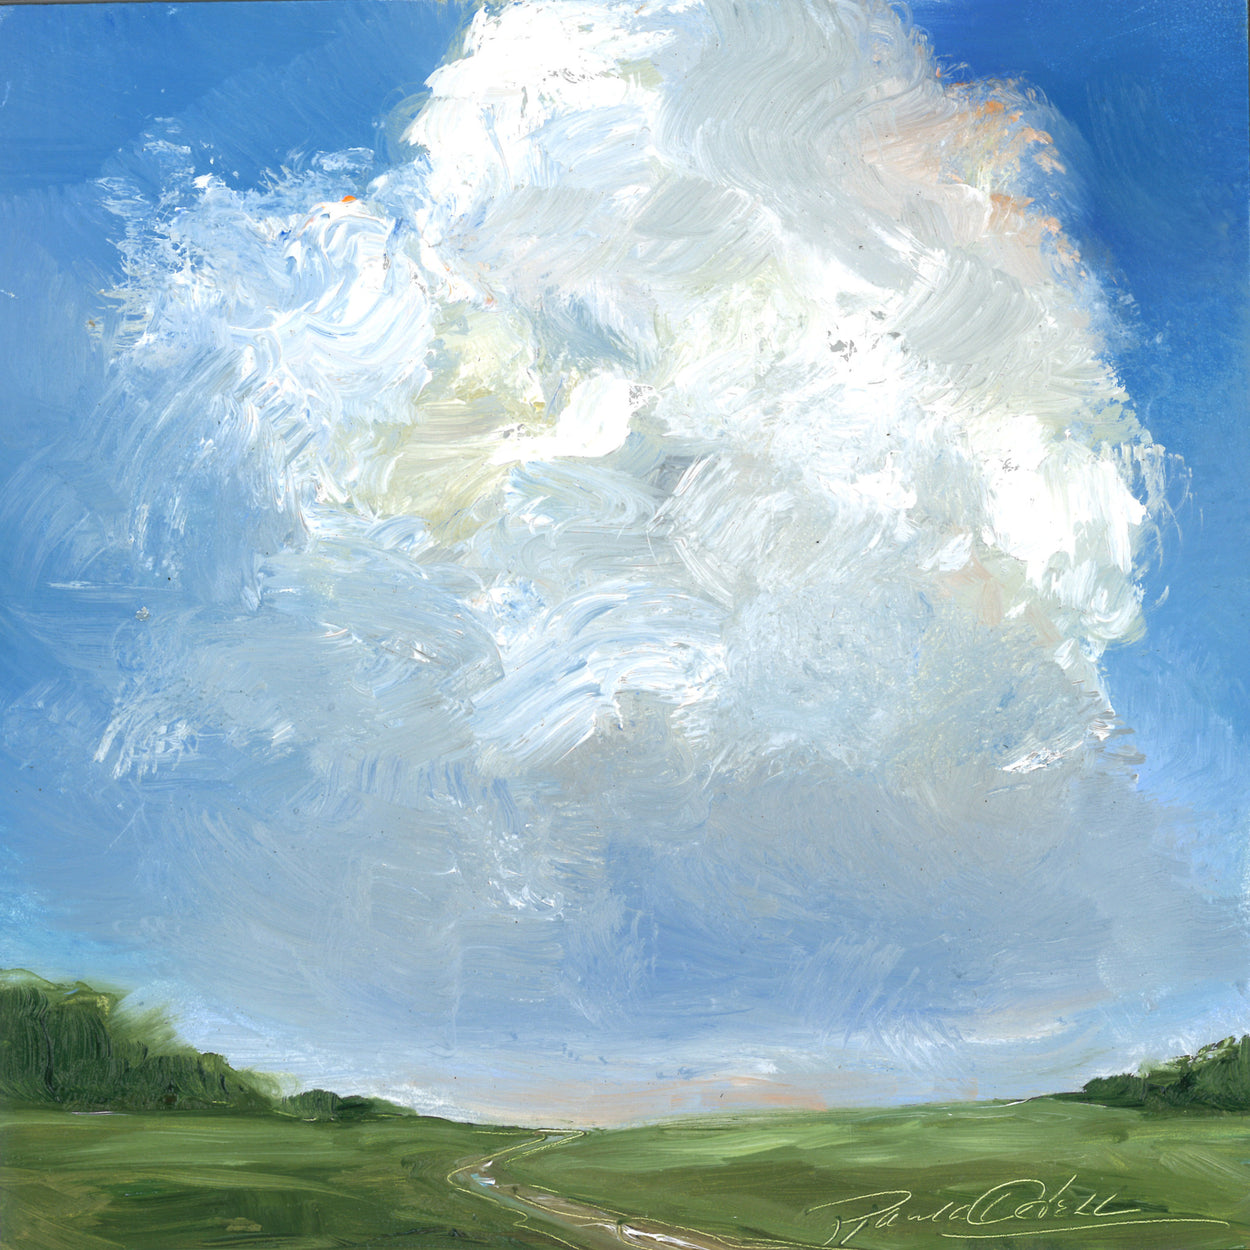 Beautiful blue sky with puffy white cloud, green meadow and sweet little path taking you to the horizon. Oil on pane. 6x6 will come framed in maple and ready to hang.